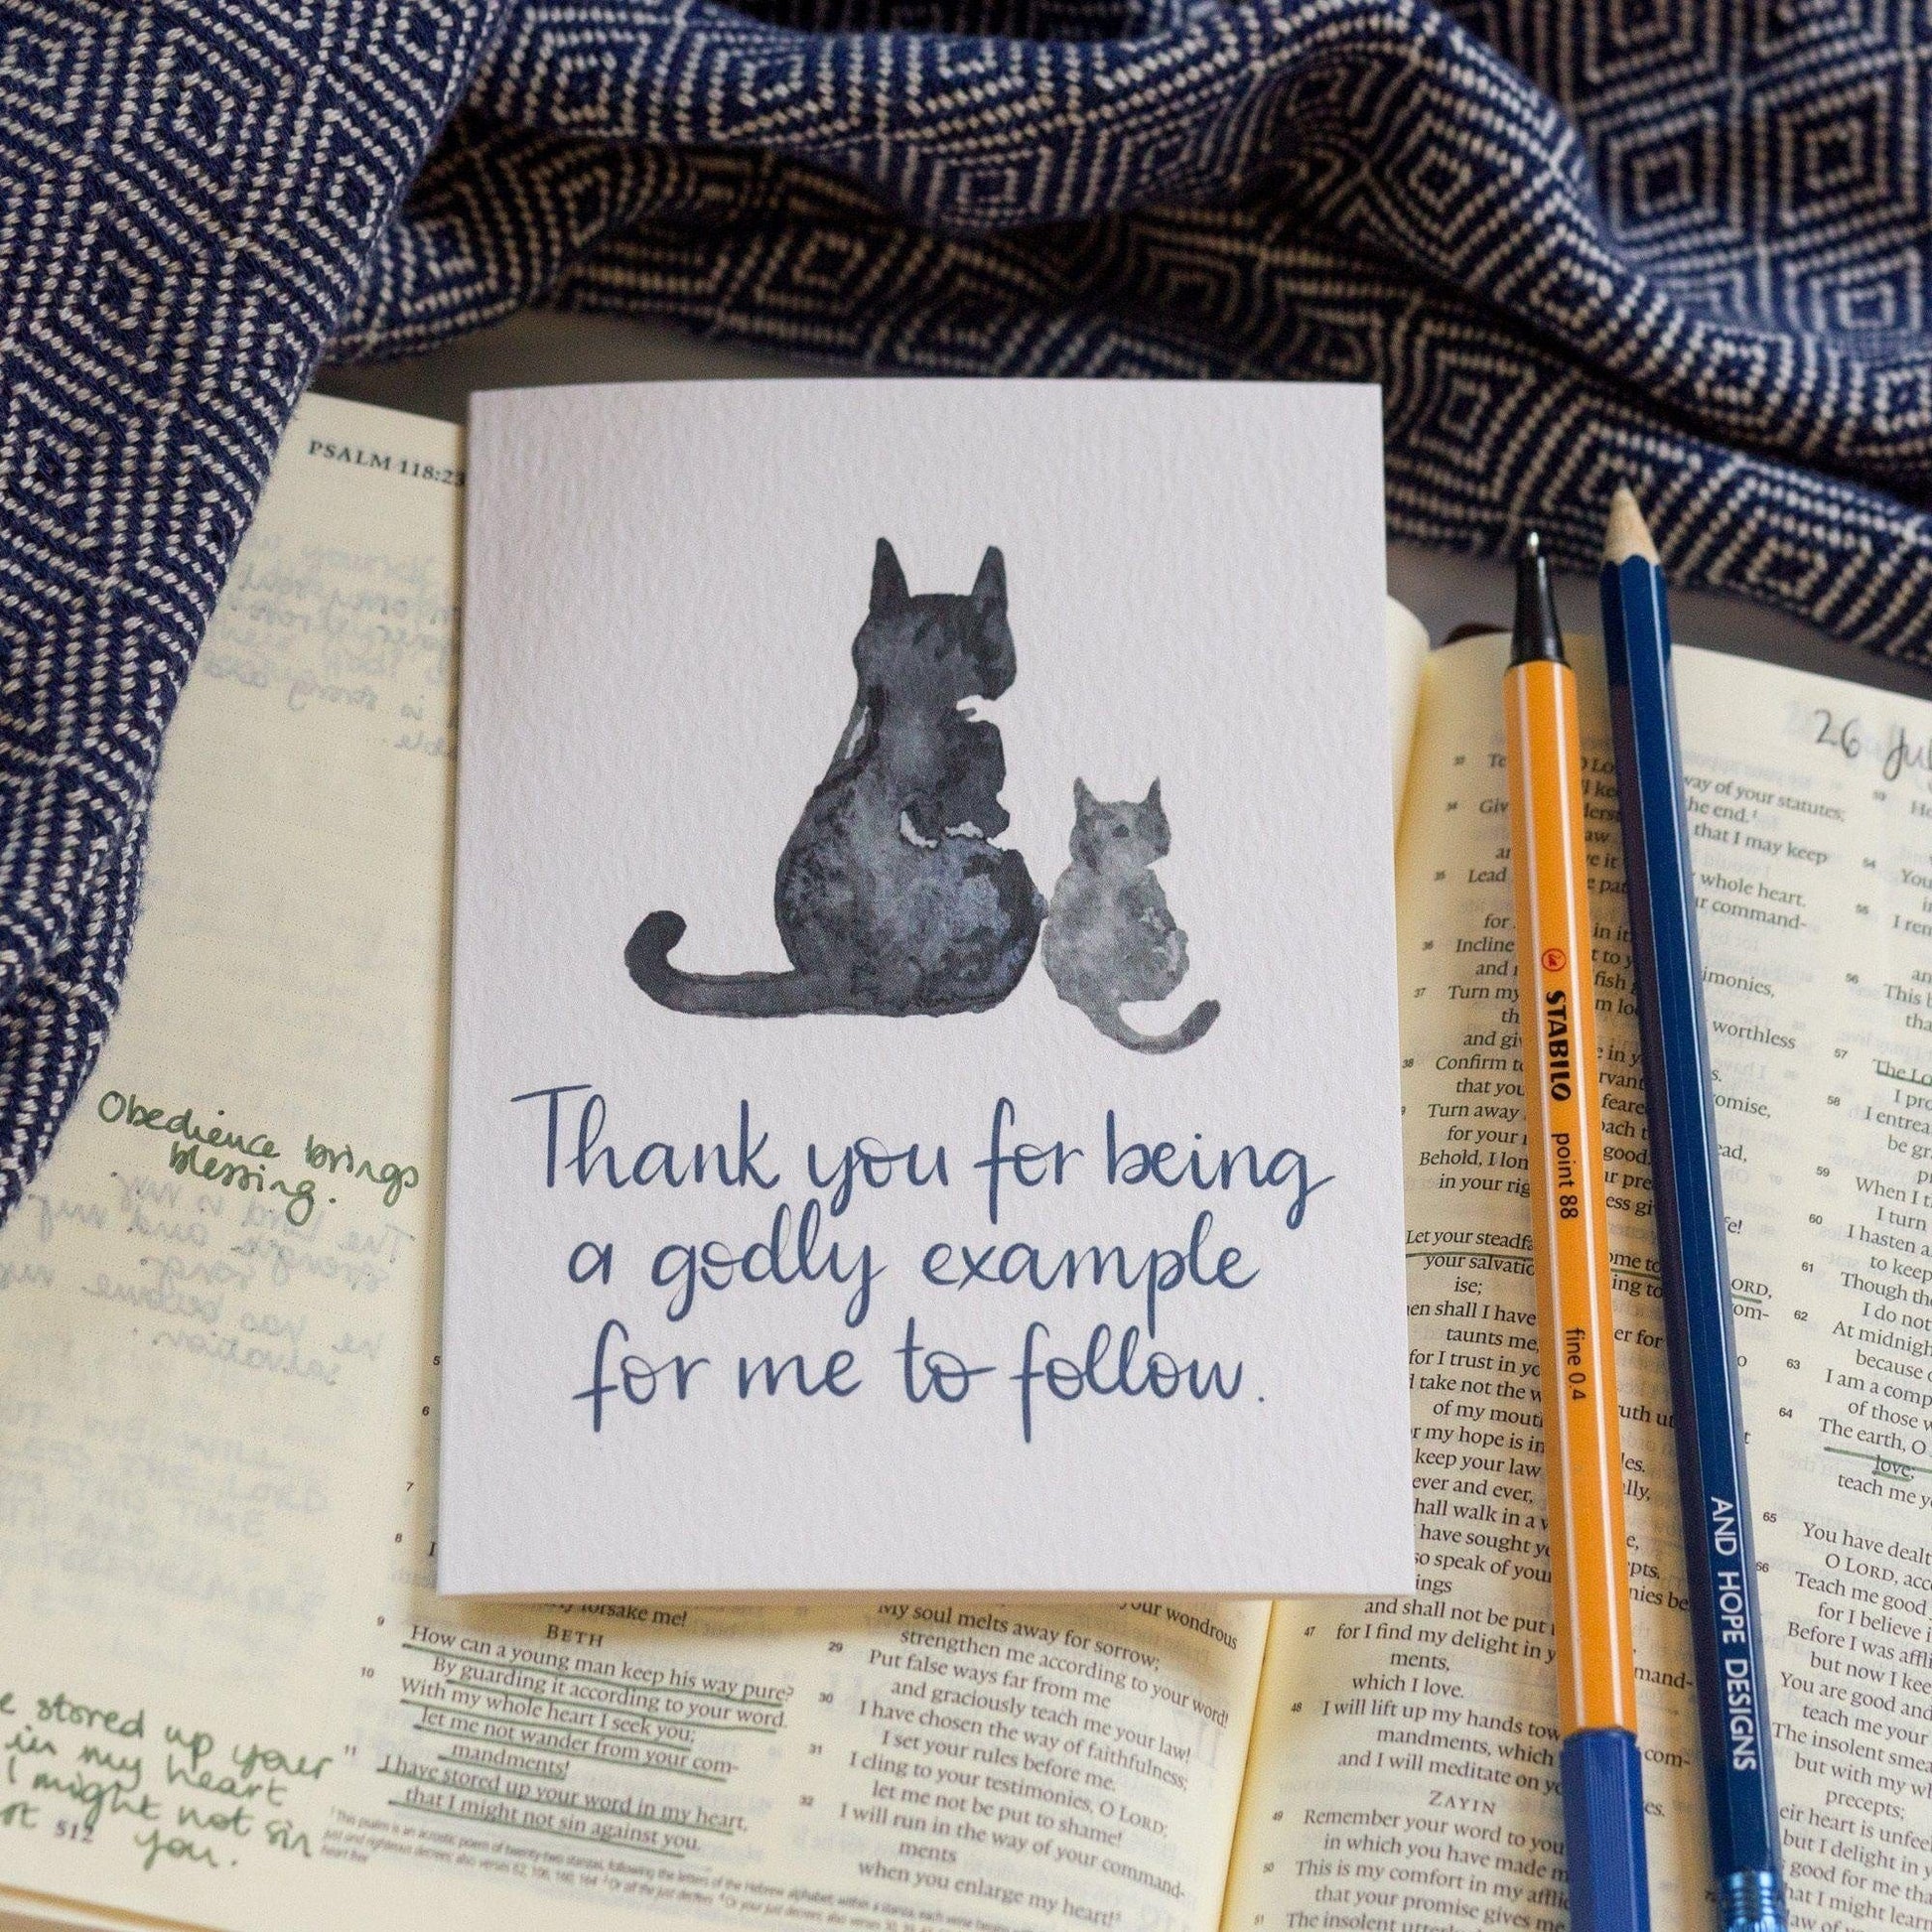 christian mentorship thank you card for a godly example to follow - card set on bible